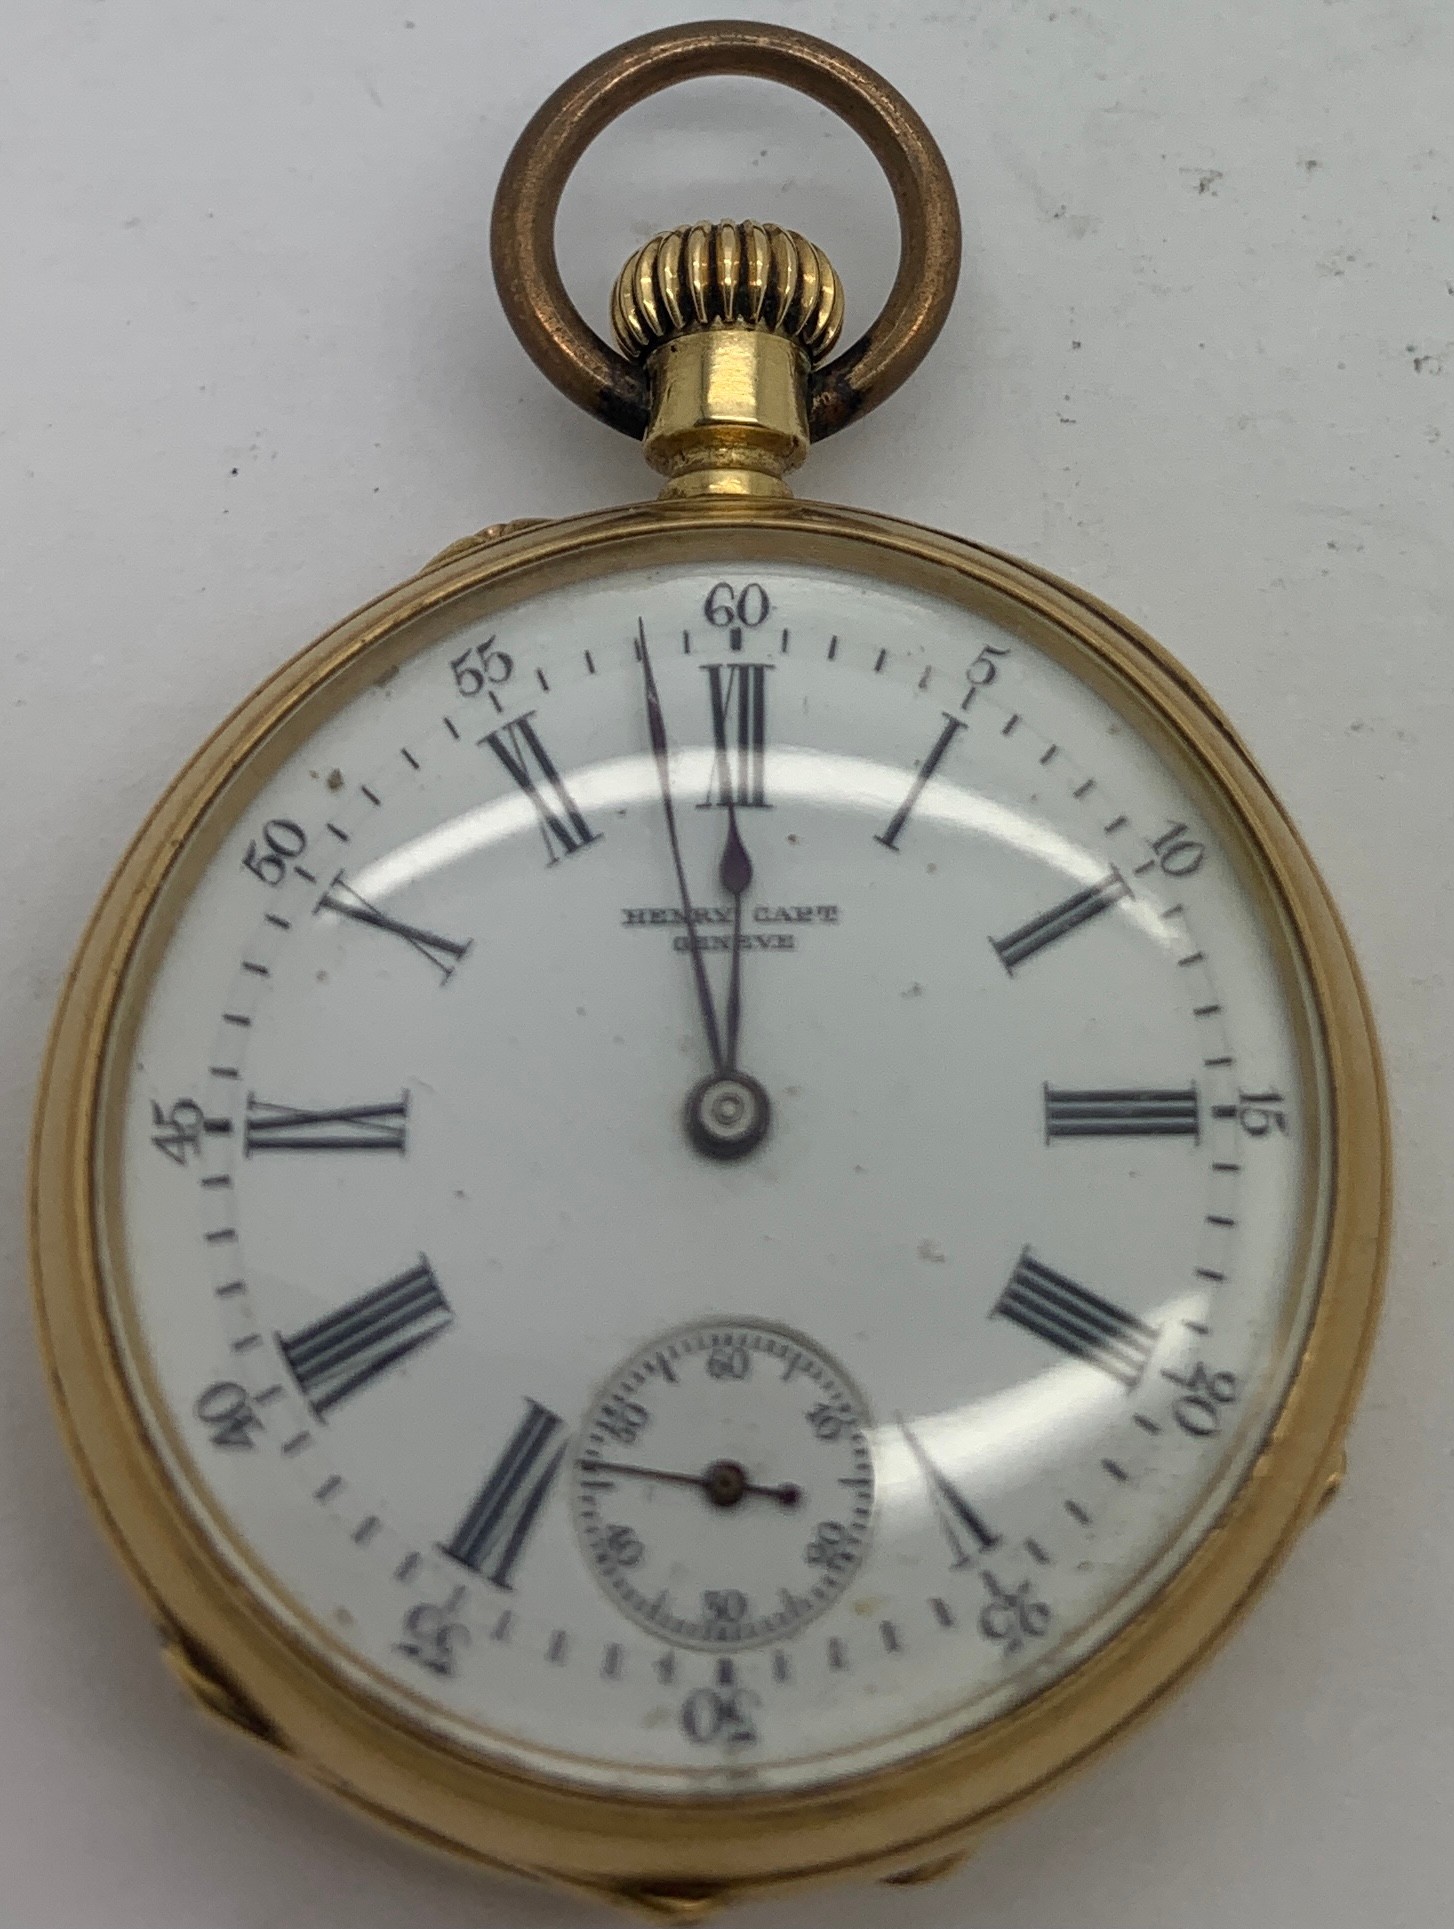 Ladies pocket watch by Henry Capt Geneve. case diameter approx. 33mms. weight 31.3gms